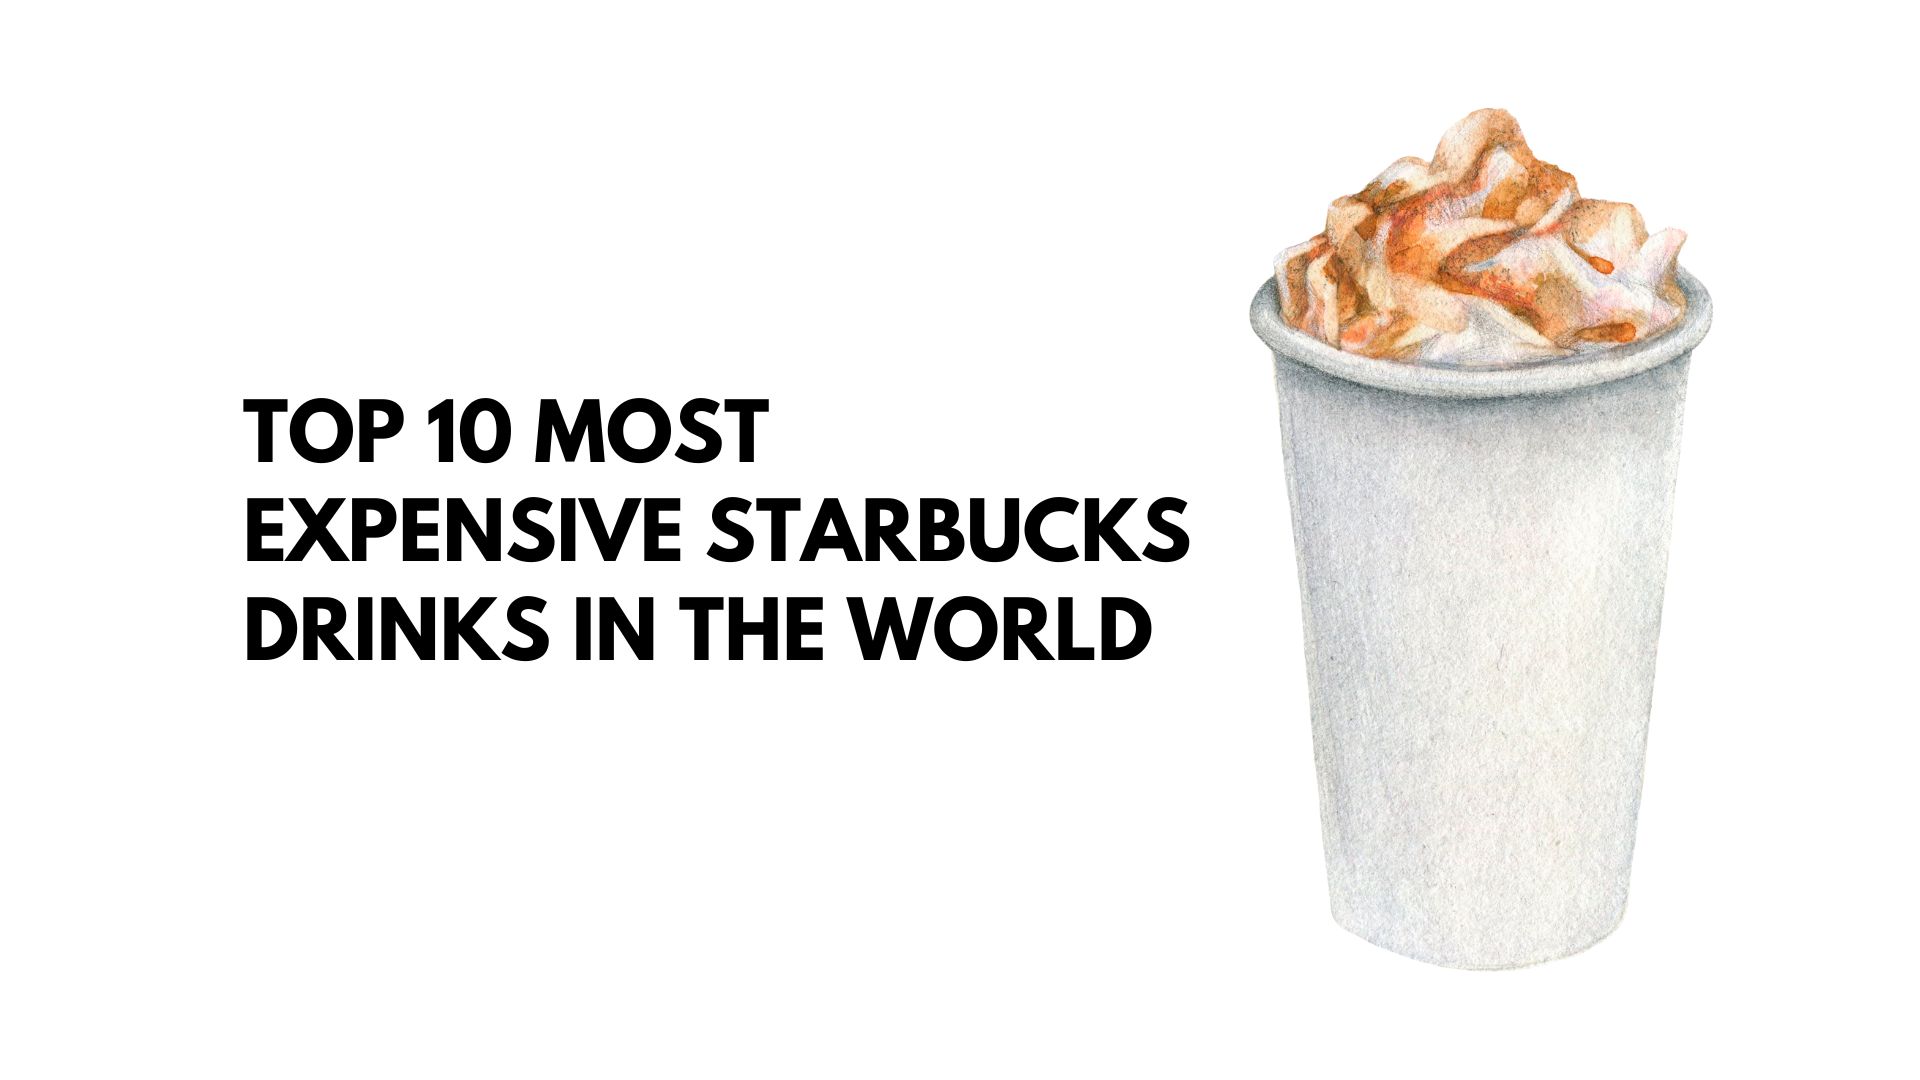 Top 10 Most Expensive Starbucks Drinks in the World (2023)